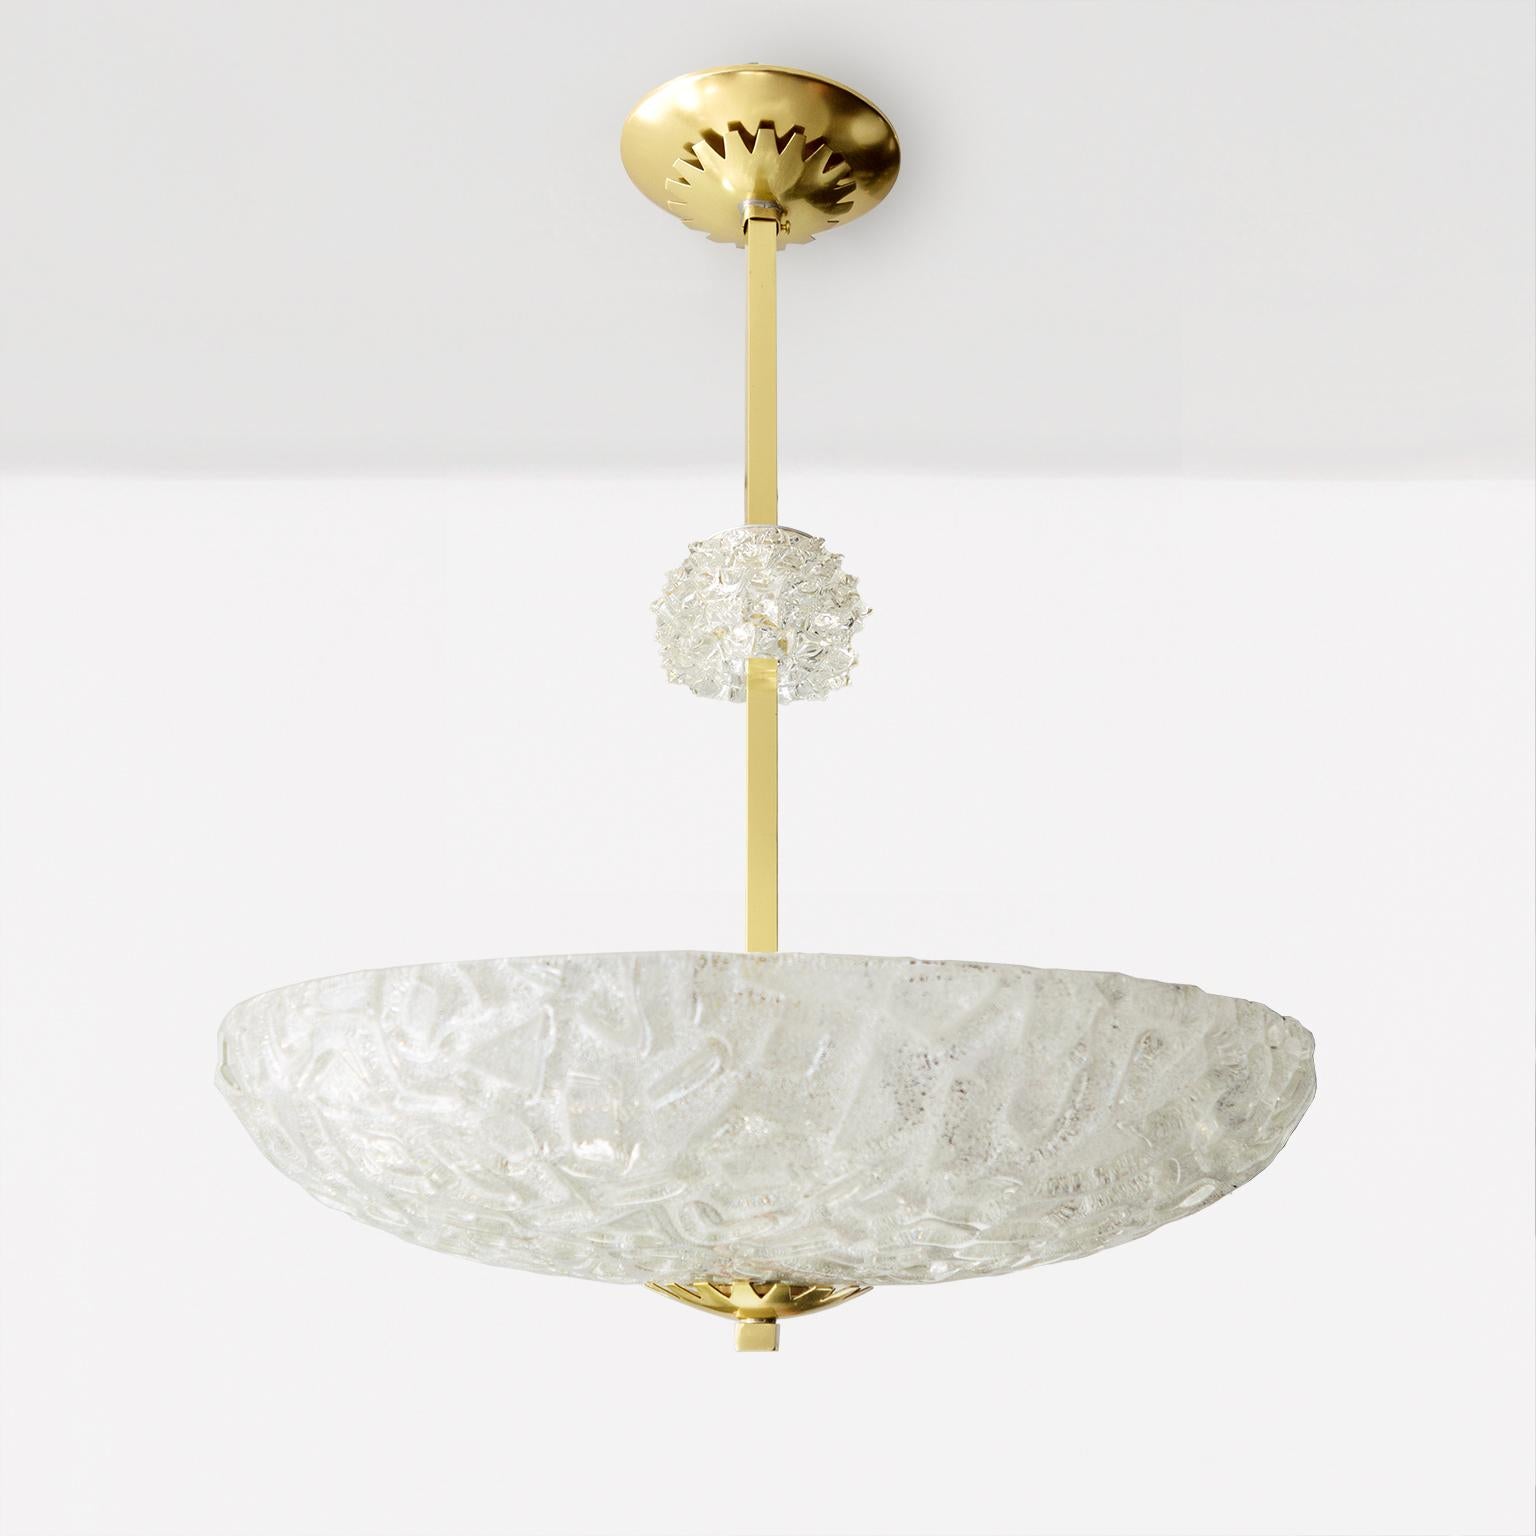 Scandinavian Modern pendant with a hand forged glass shade with icy, crystalline textures. A satellite spiky glass element hovers on the four sided brass stem. The shade’s polished brass finial is echoed just below the all brass canopy. Newly wired